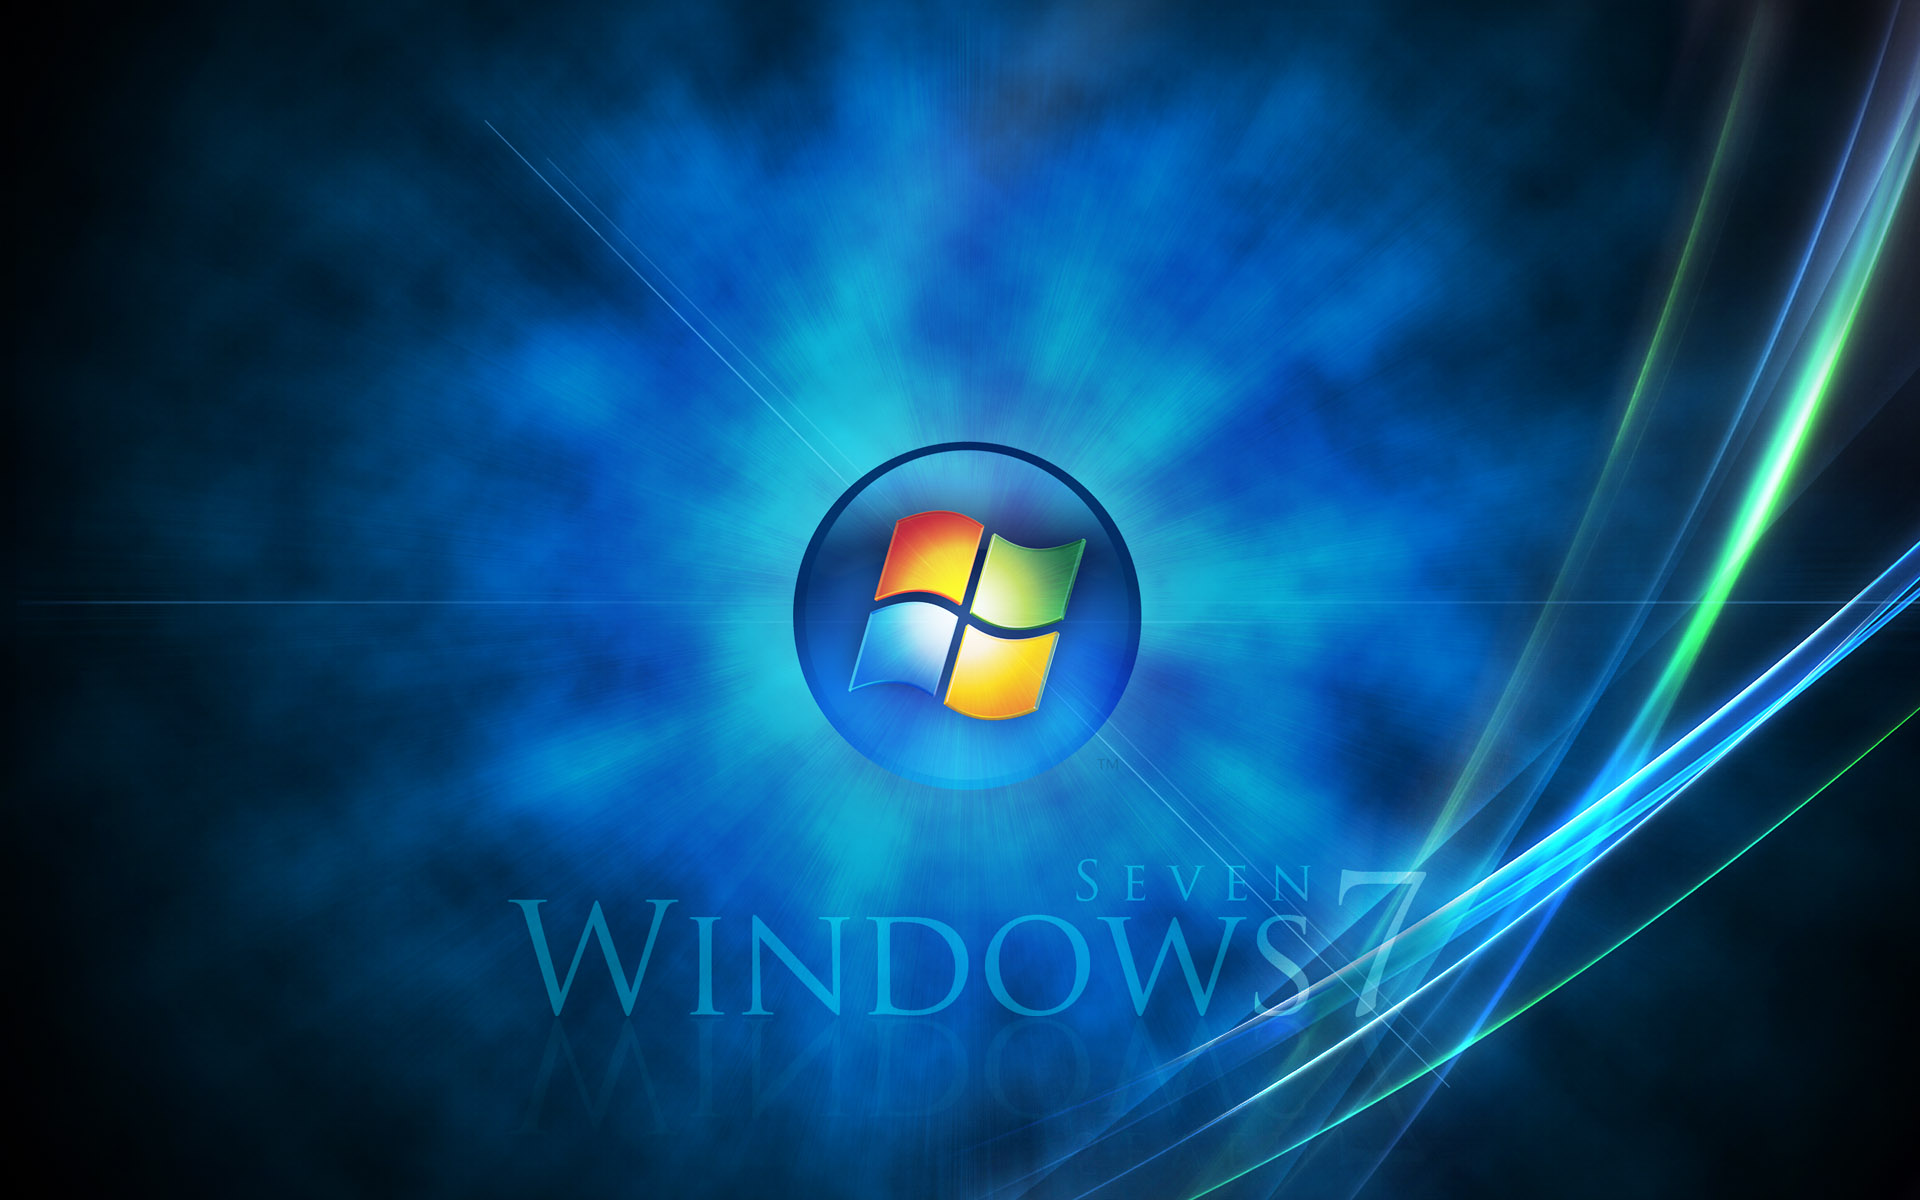 Awesome Windows 7 Wallpaper Download For Compu #14798 Wallpaper ...